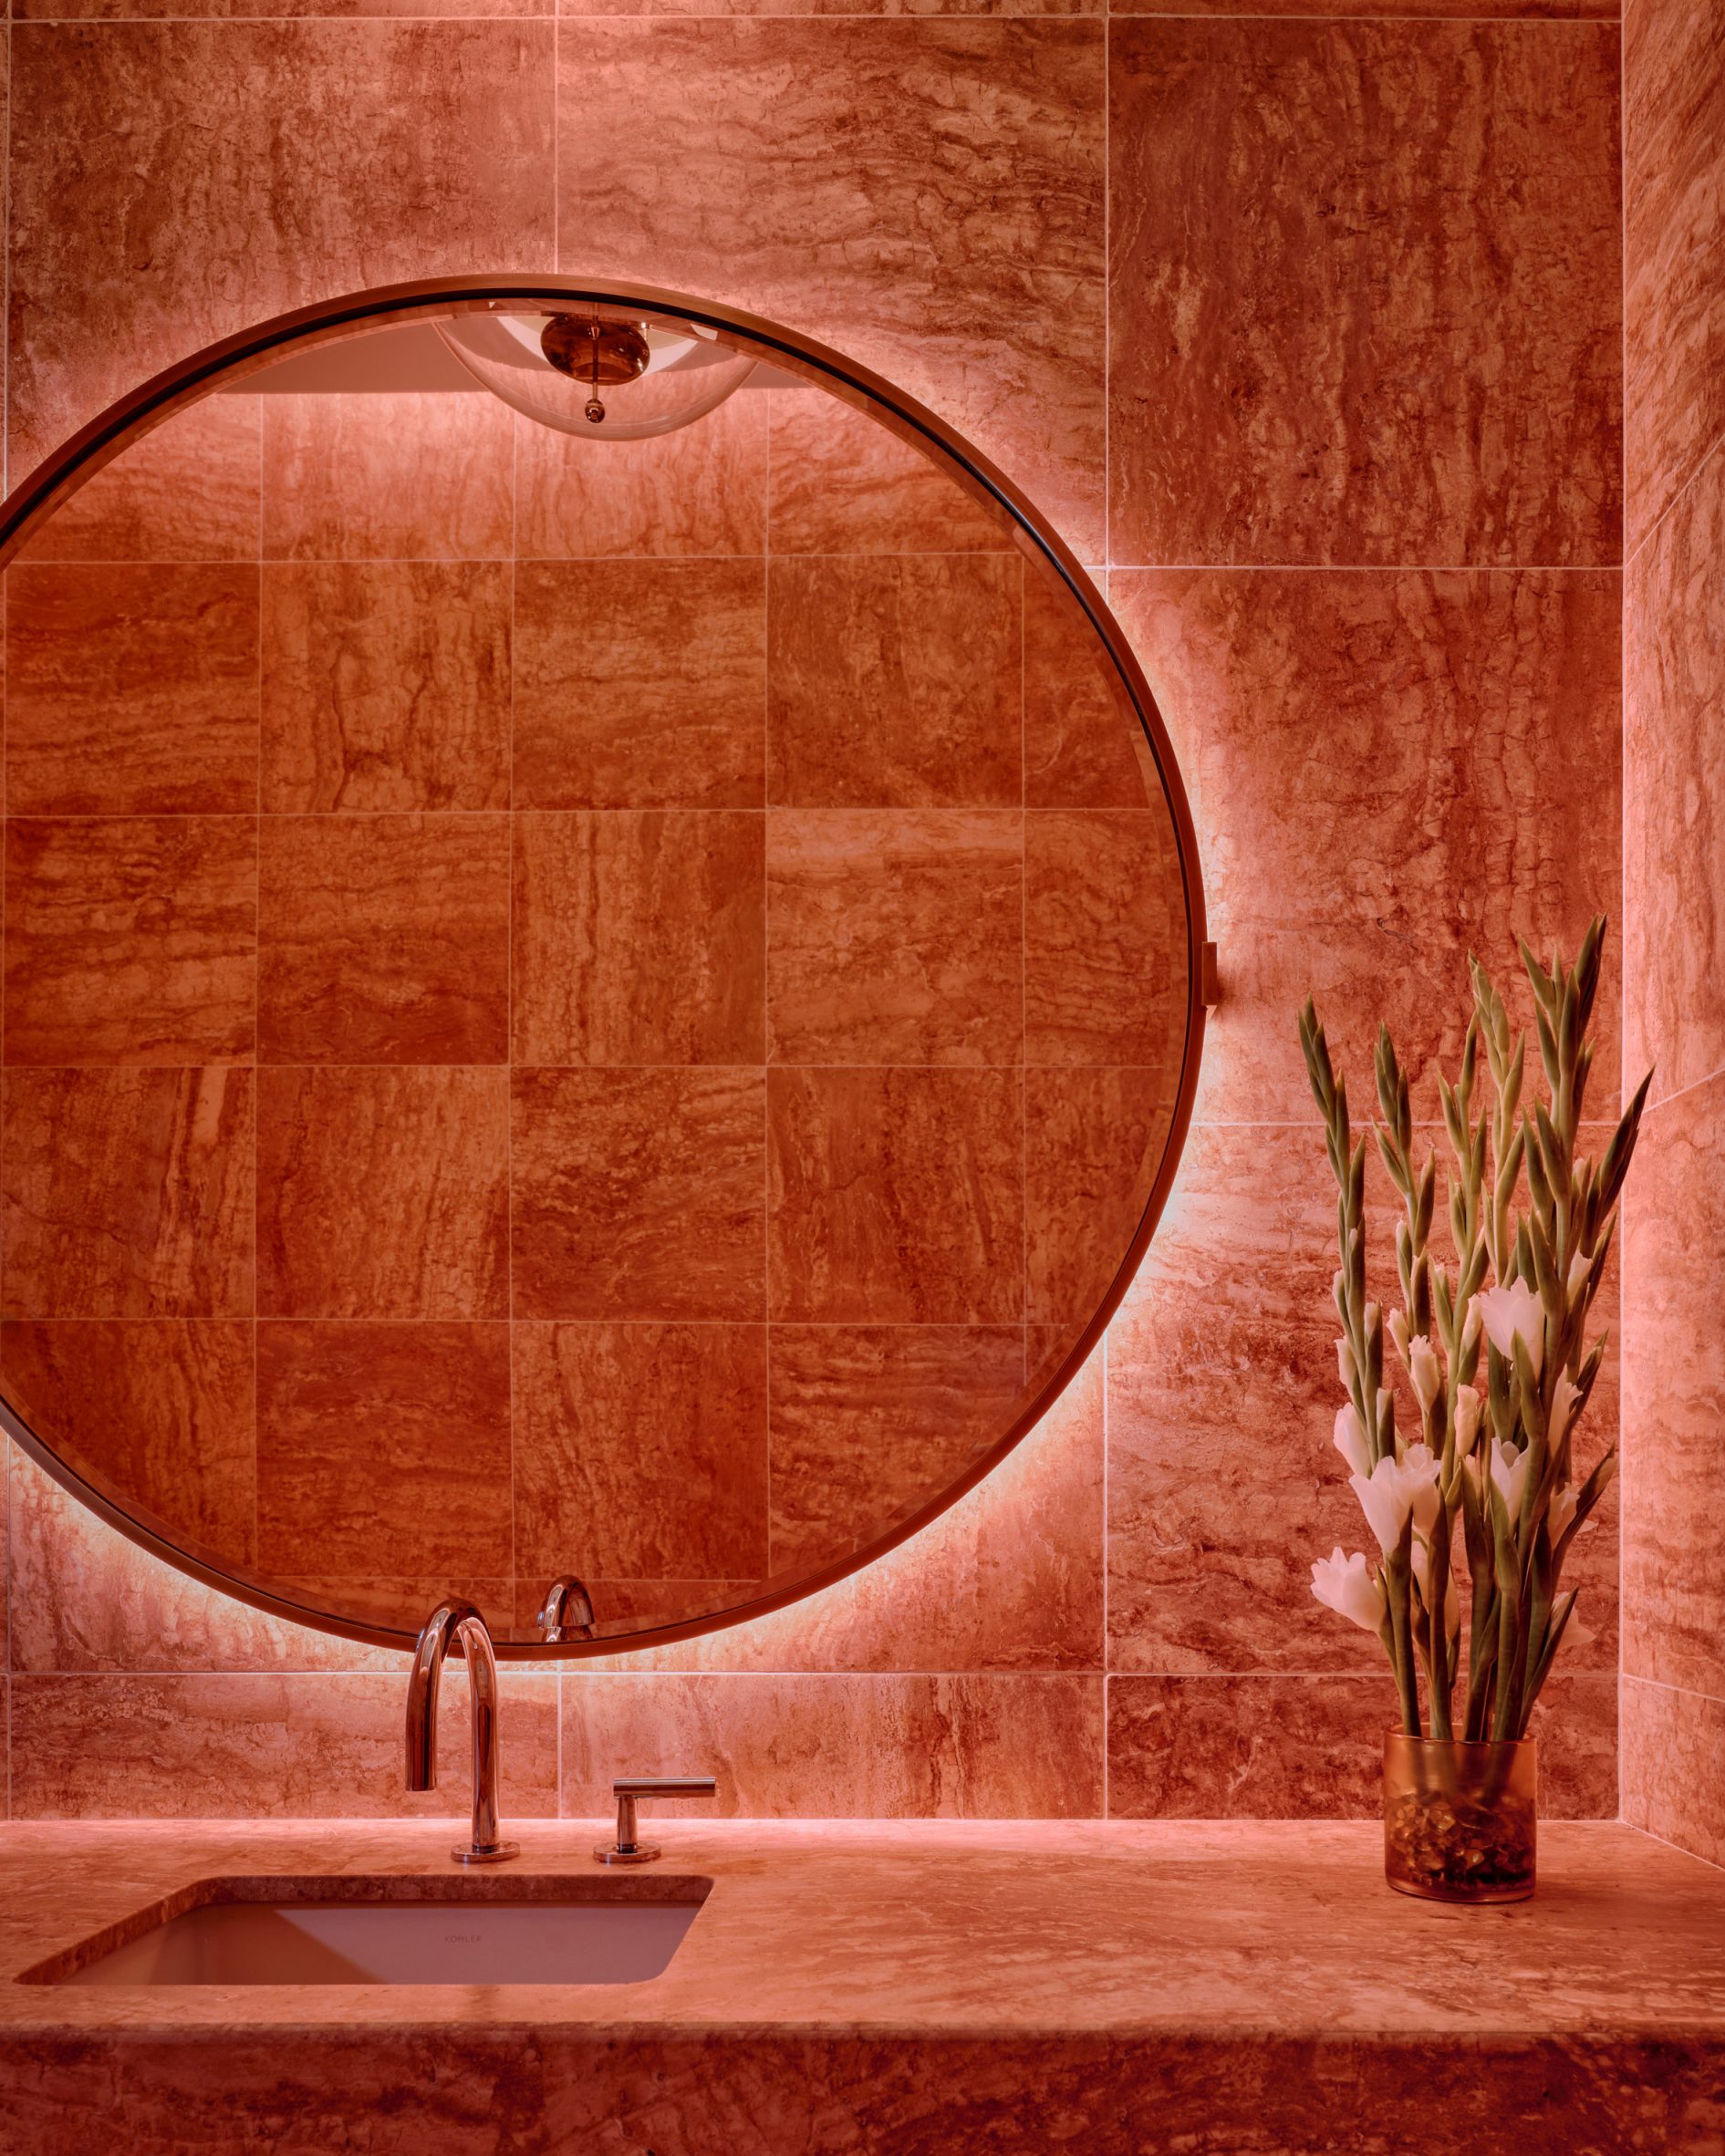 Bathroom with a large circular mirror and walls lined in pink-red stone tiles